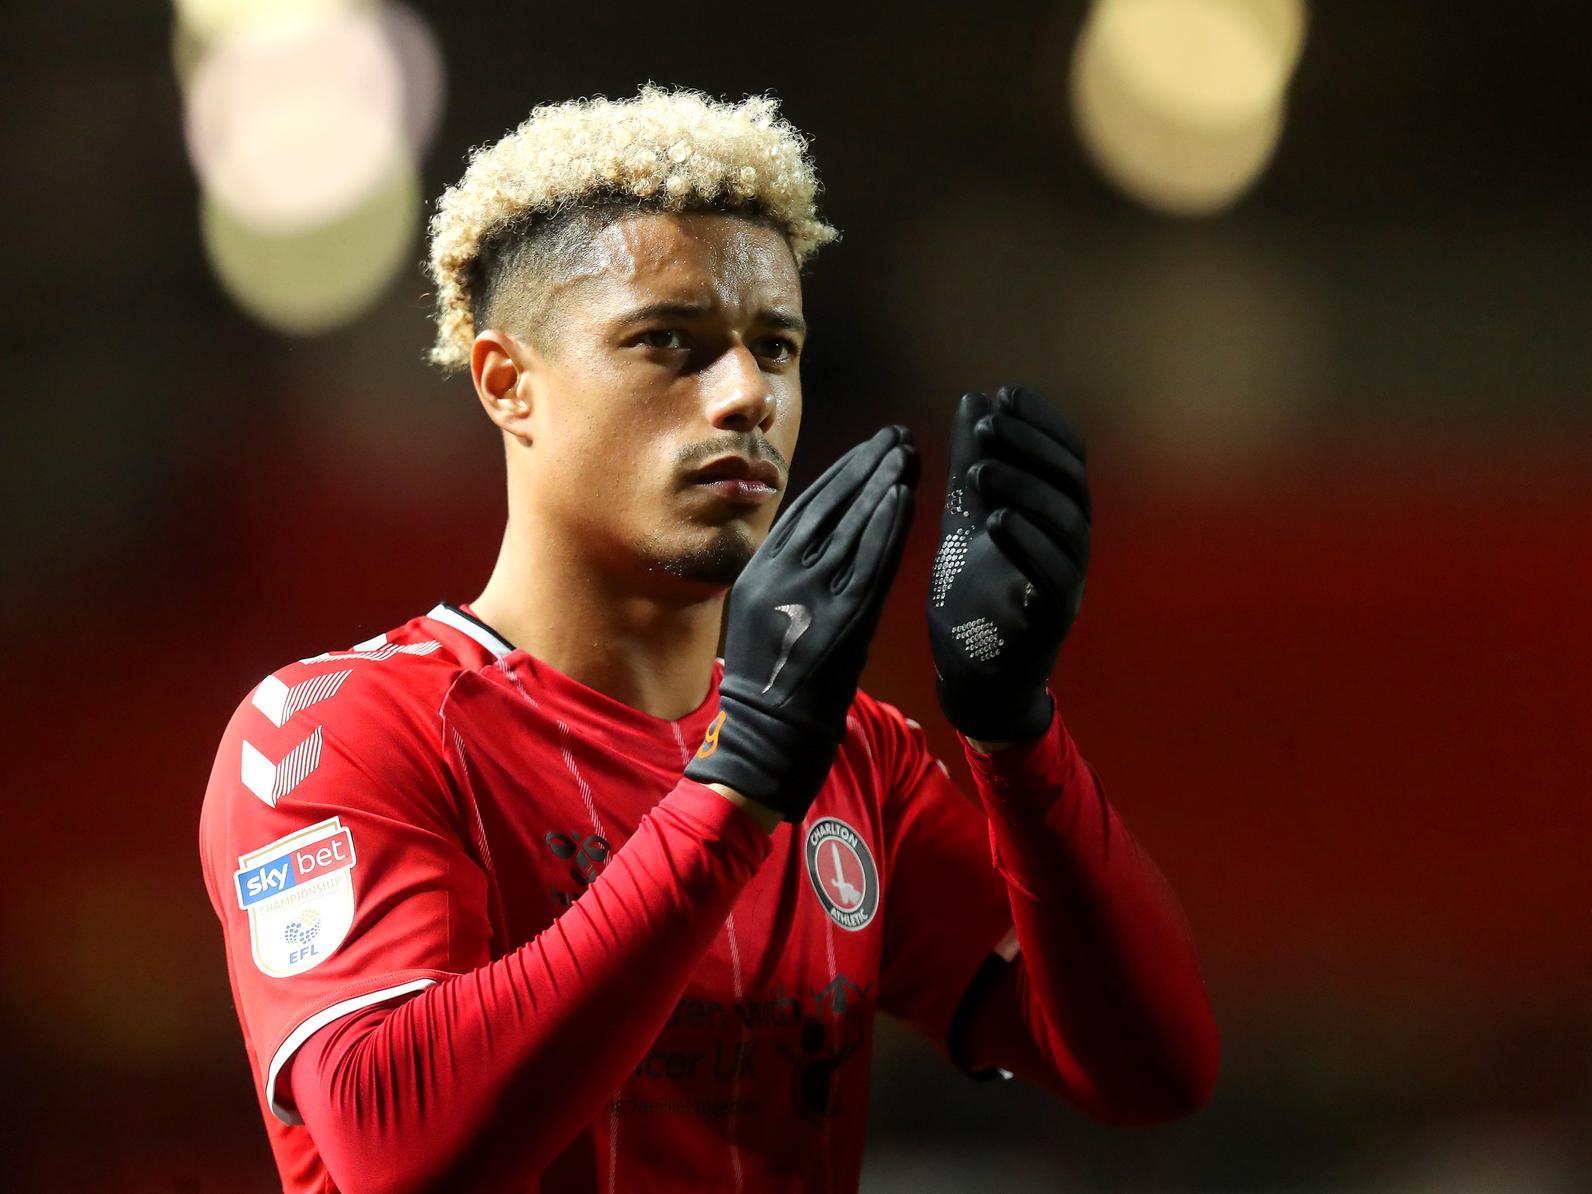 Charlton Athletic are rumoured to have knocked back a bid from Bristol City for their striker Lyle Taylor, who has been in high demand after impressing in the first half of the season. (Daily Mail)